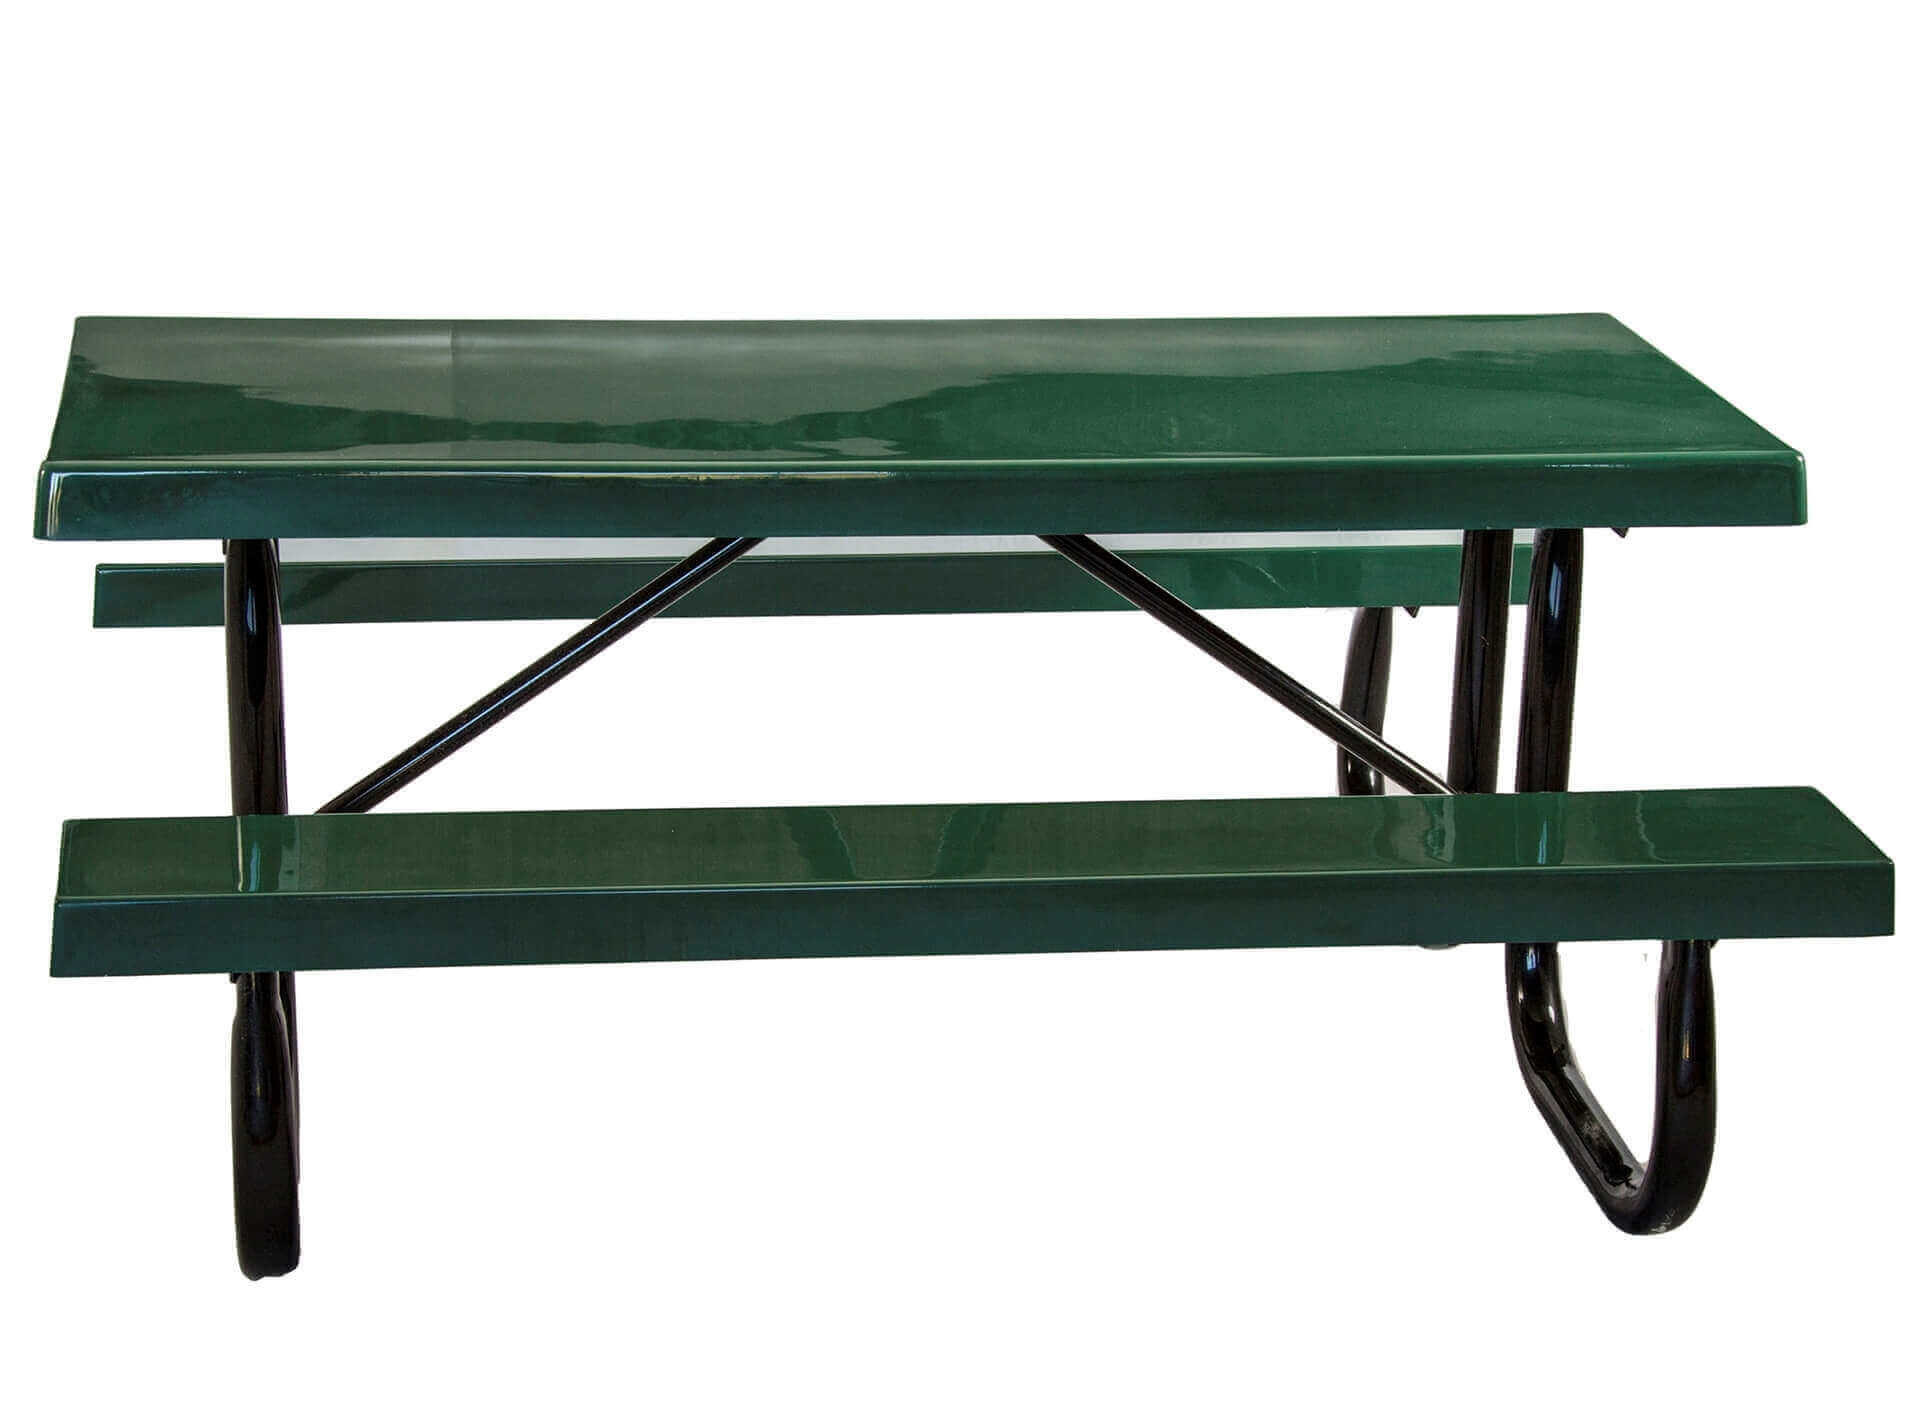 20 Trendy Galvanized Sheet Metal Vase 2024 free download galvanized sheet metal vase of 6 ft heavy duty fiberglass picnic table with welded galvanized pertaining to 6 ft heavy duty fiberglass picnic table with welded galvanized steel frame